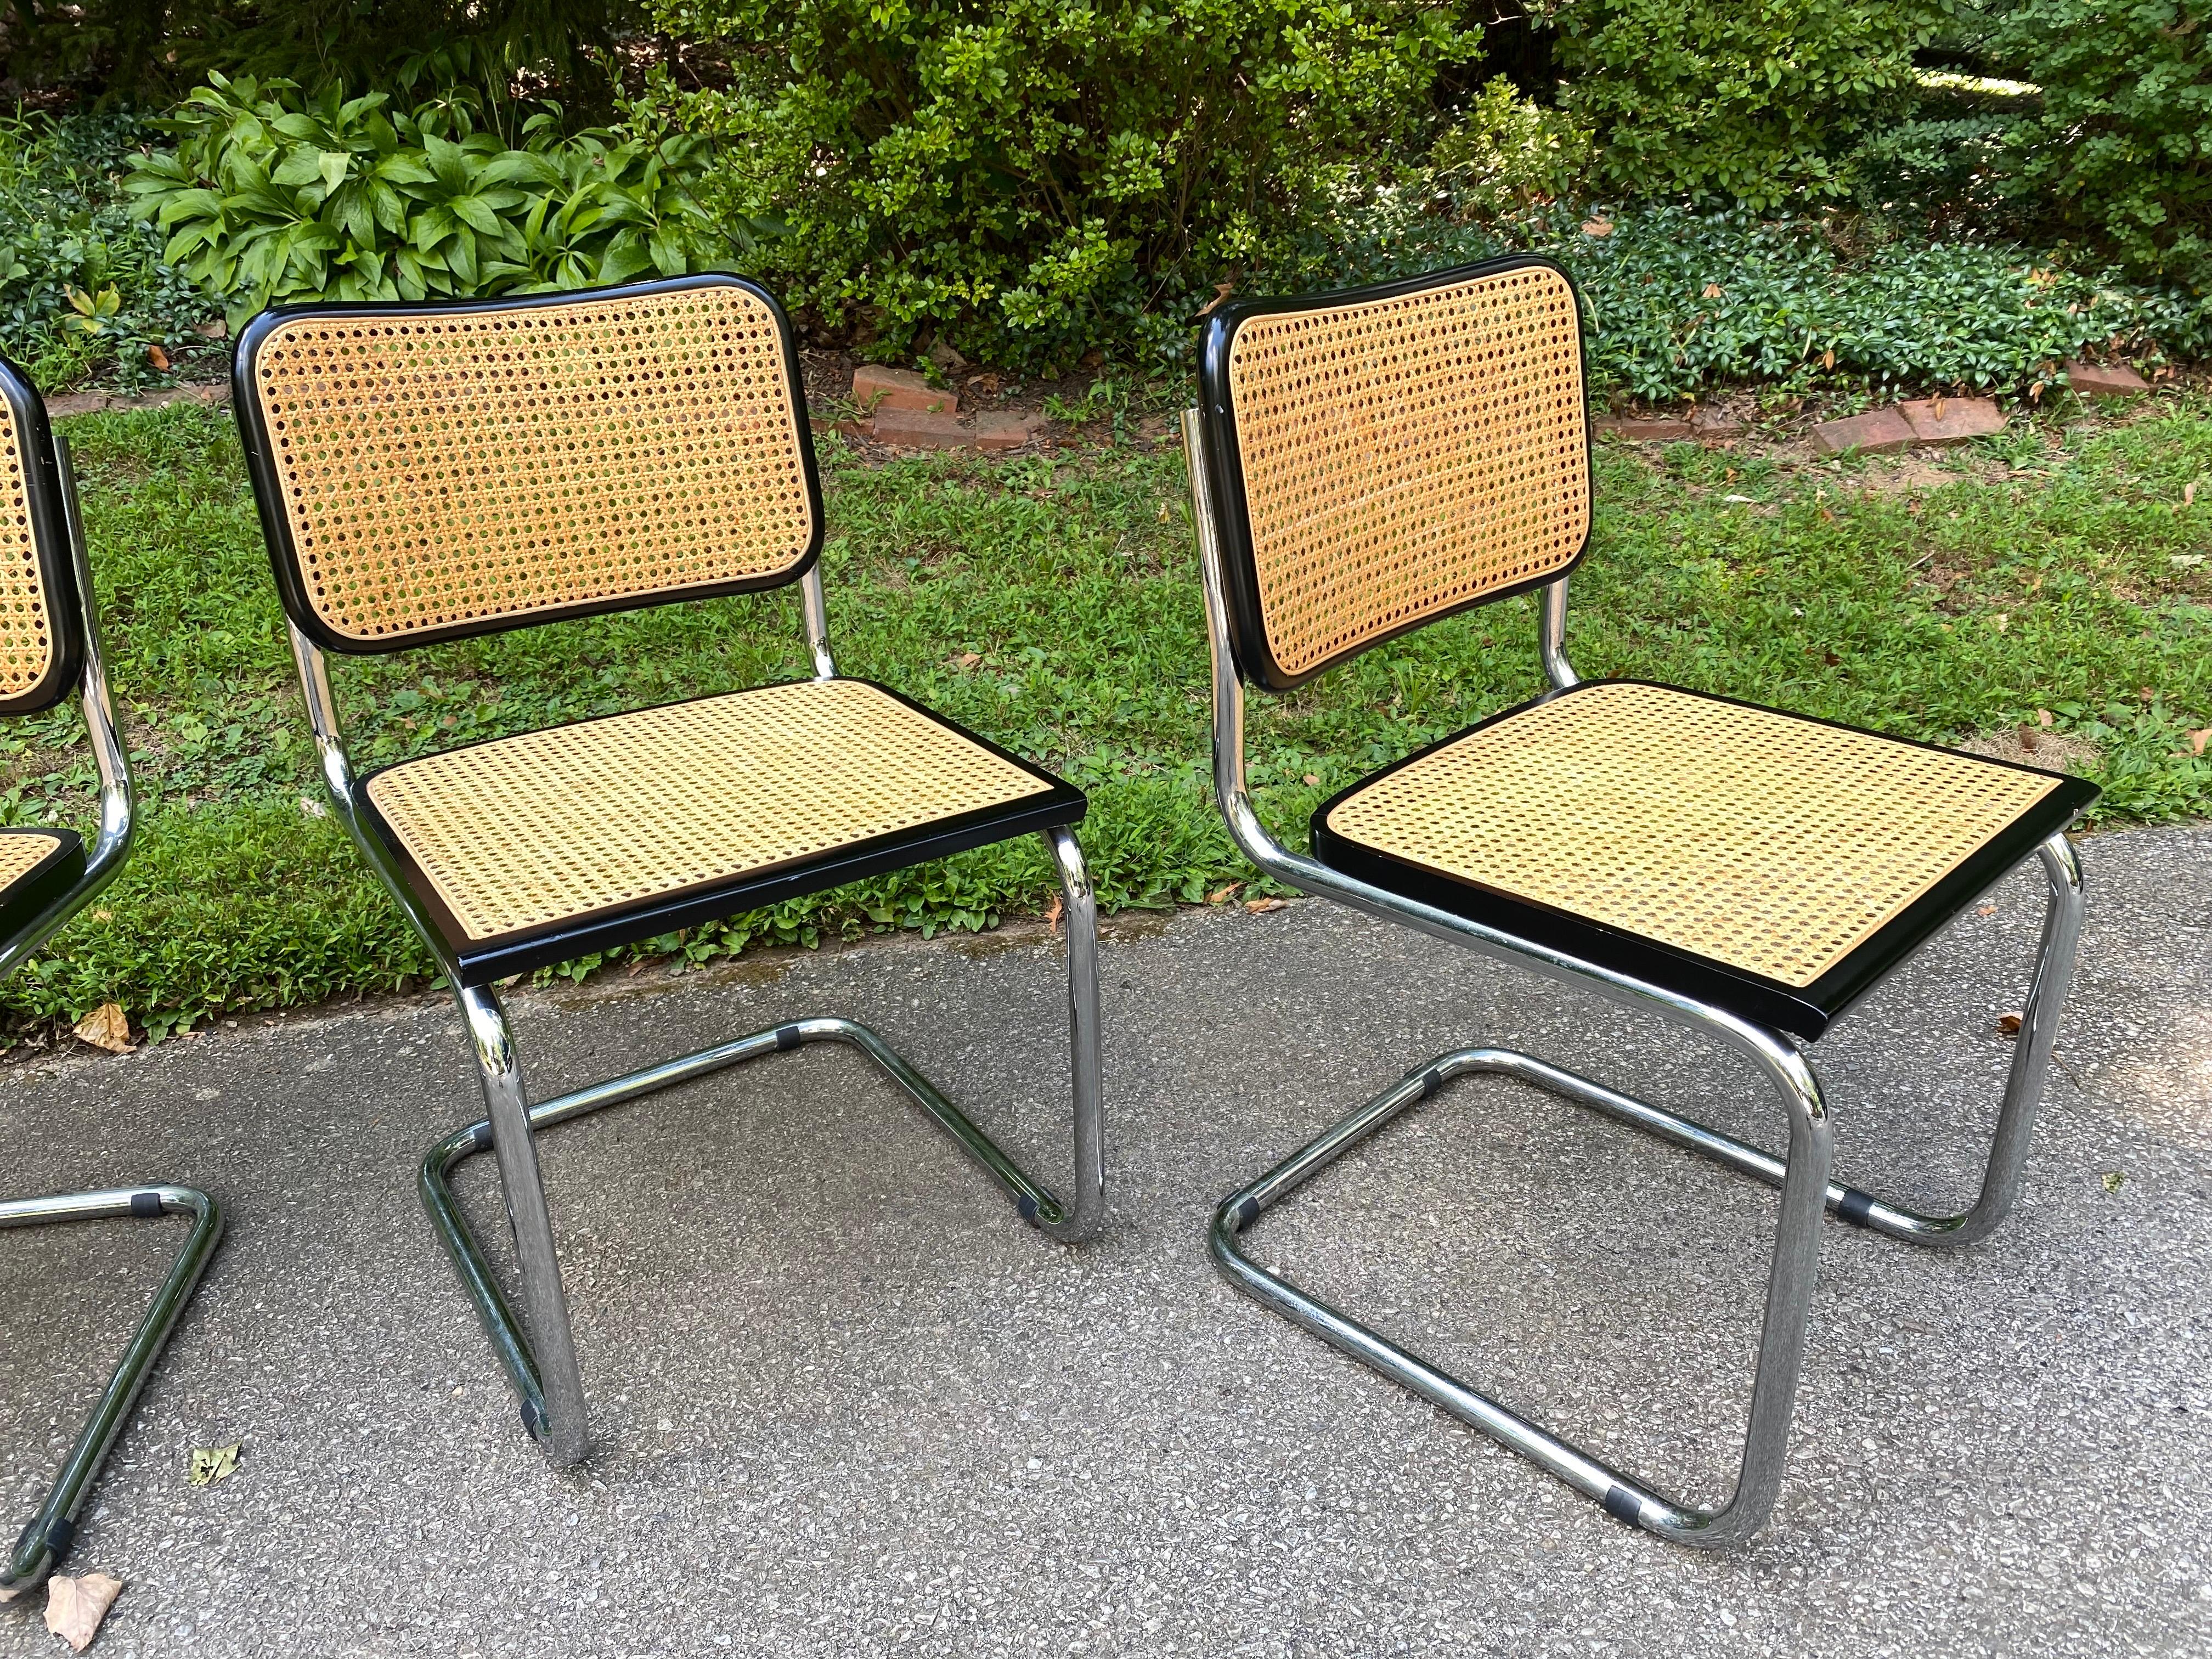 Set of very clean Cesca chairs designed by Marcel Breuer. Black wood frames, caning and very clean chrome! Chairs probably date to late 70's or early 80's.